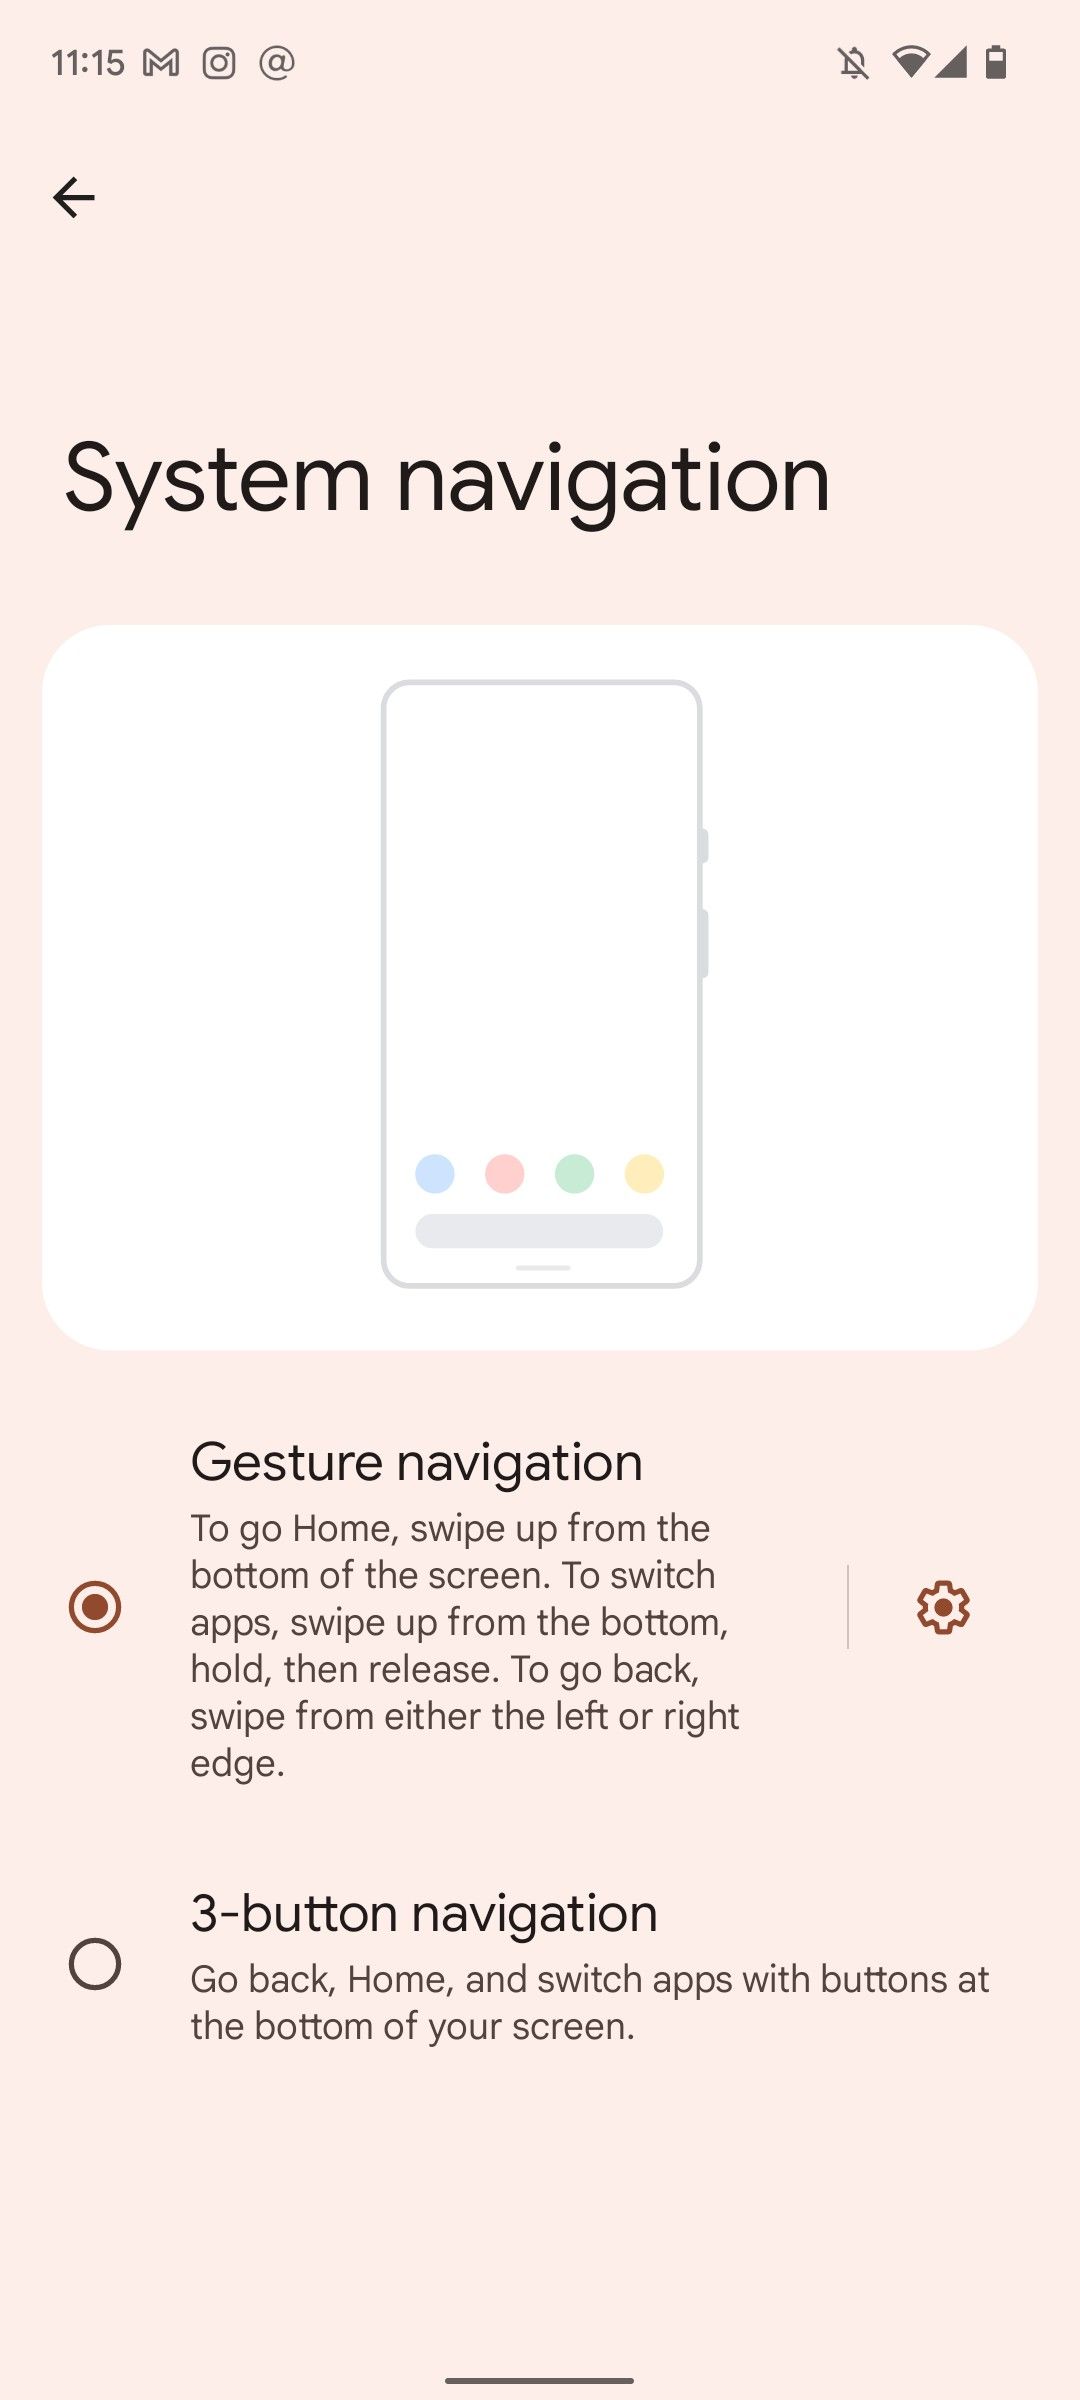 How to use gesture navigation on Pixel 4